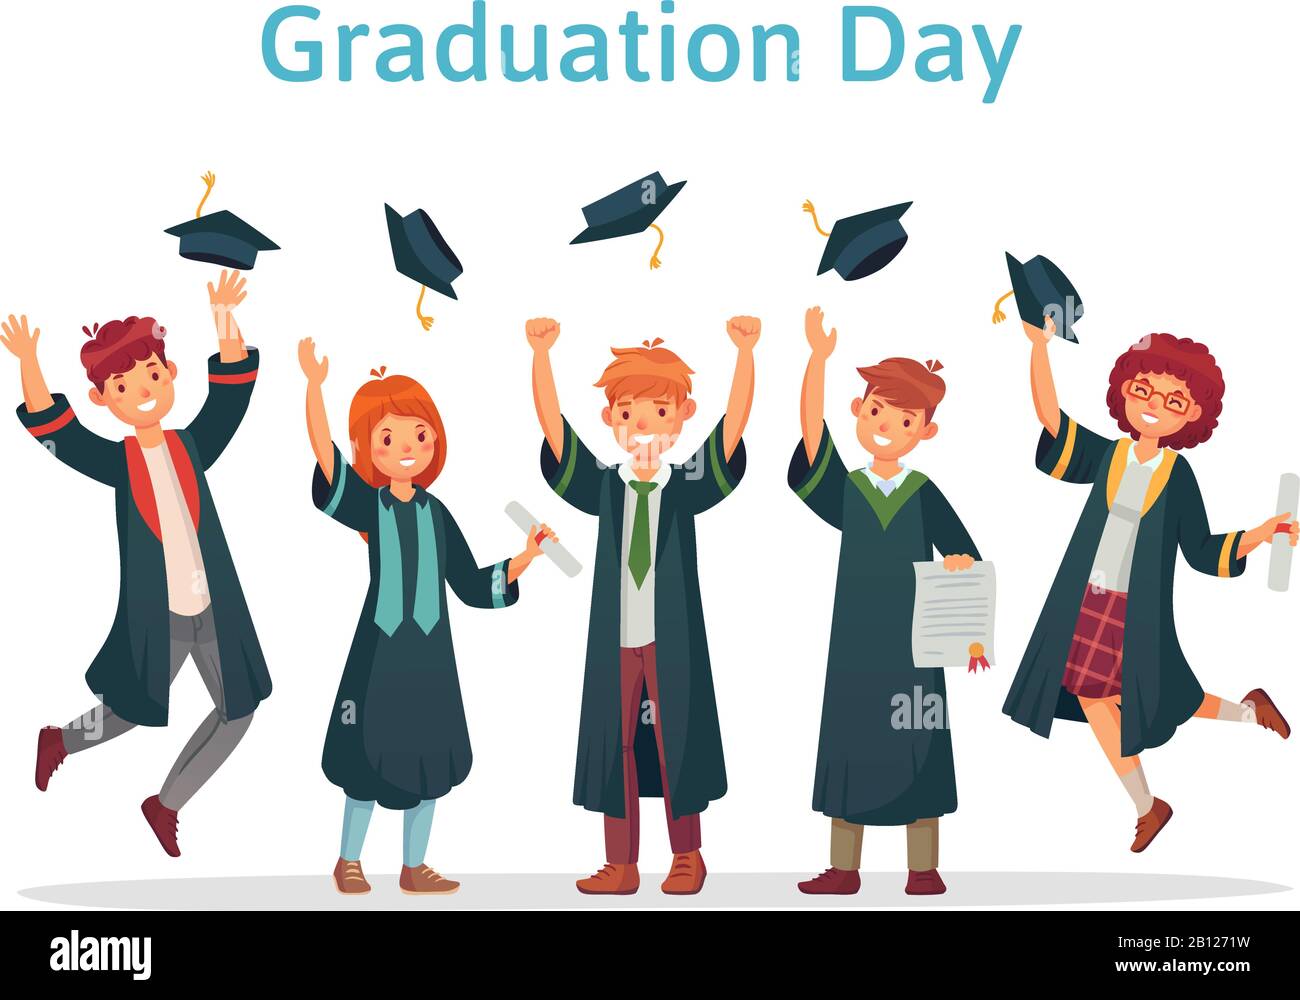 Graduate students. Graduation day of university student, success exam and college group throwing up academic caps vector illustration Stock Vector